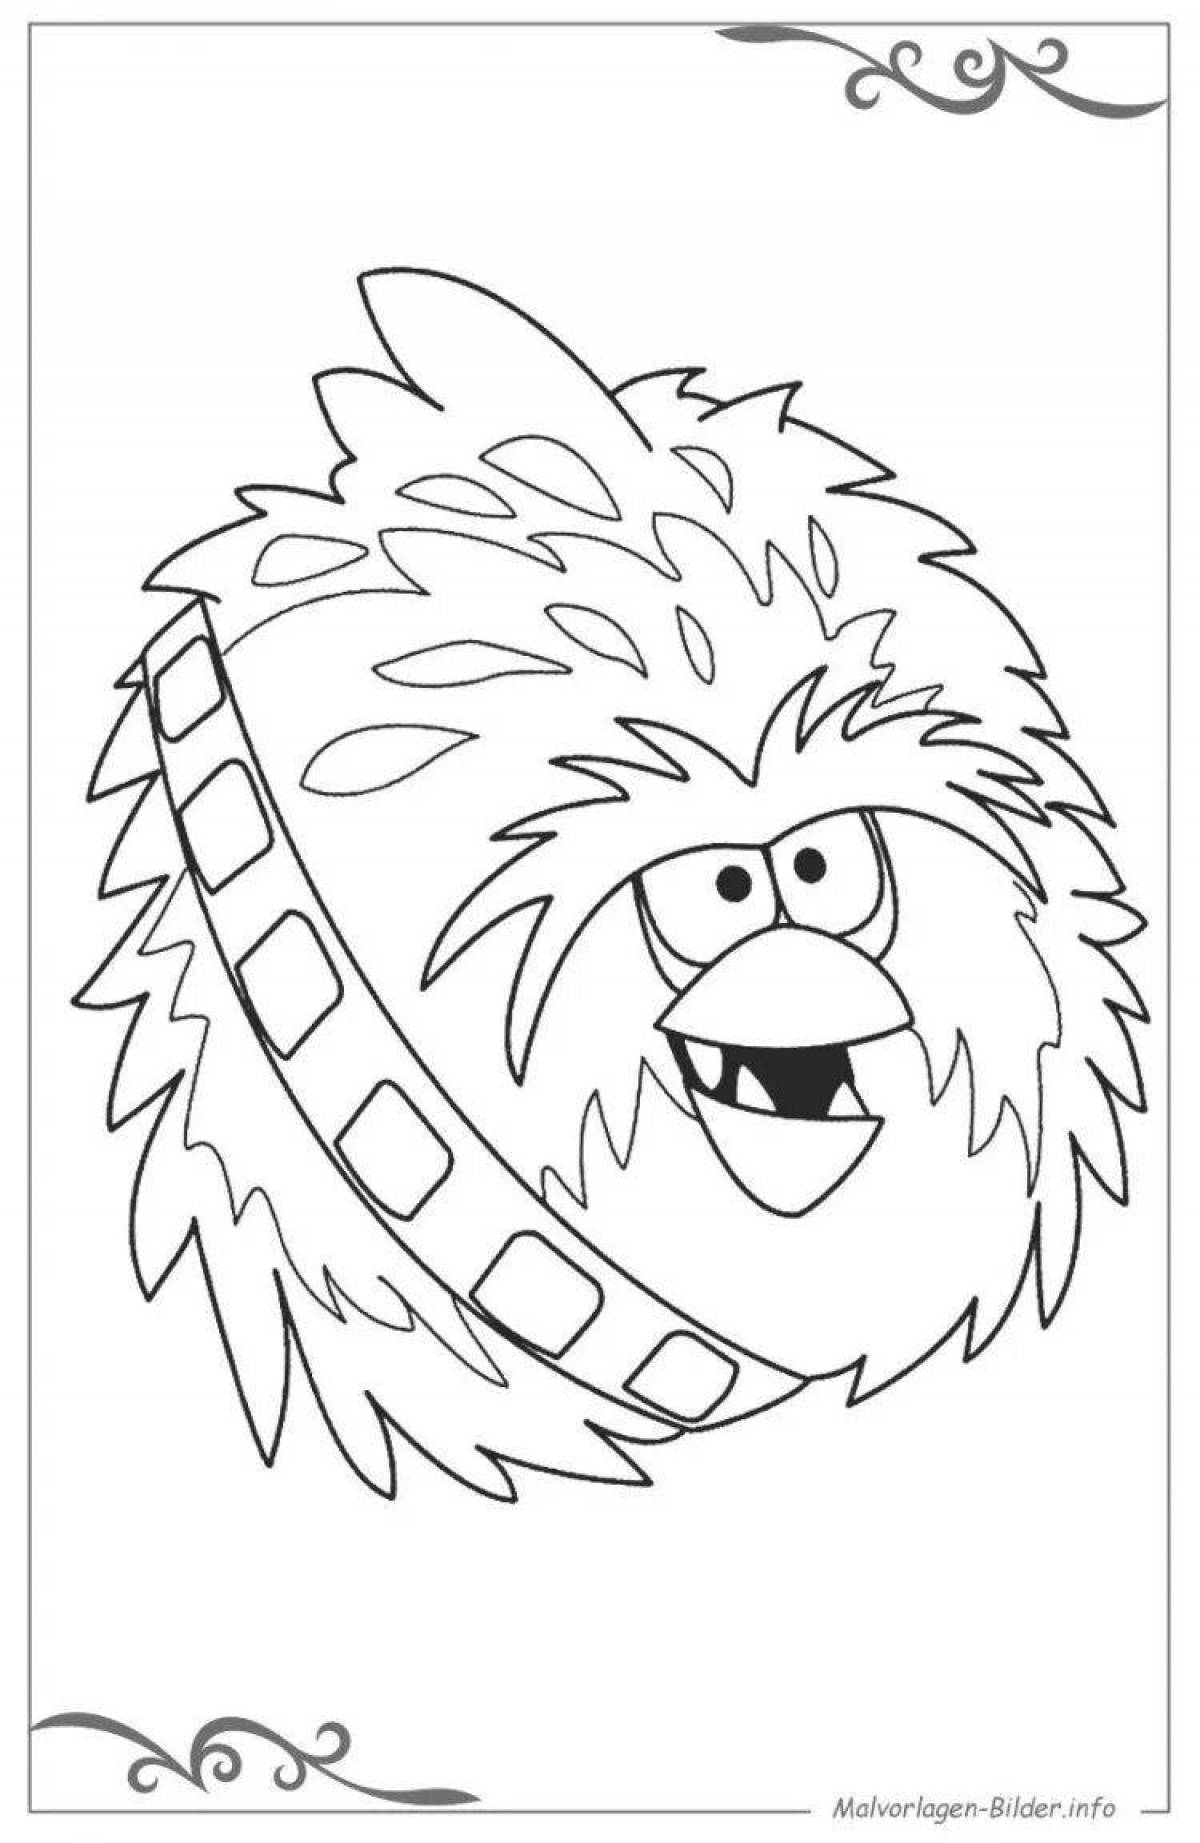 Funny babayka coloring book for kids